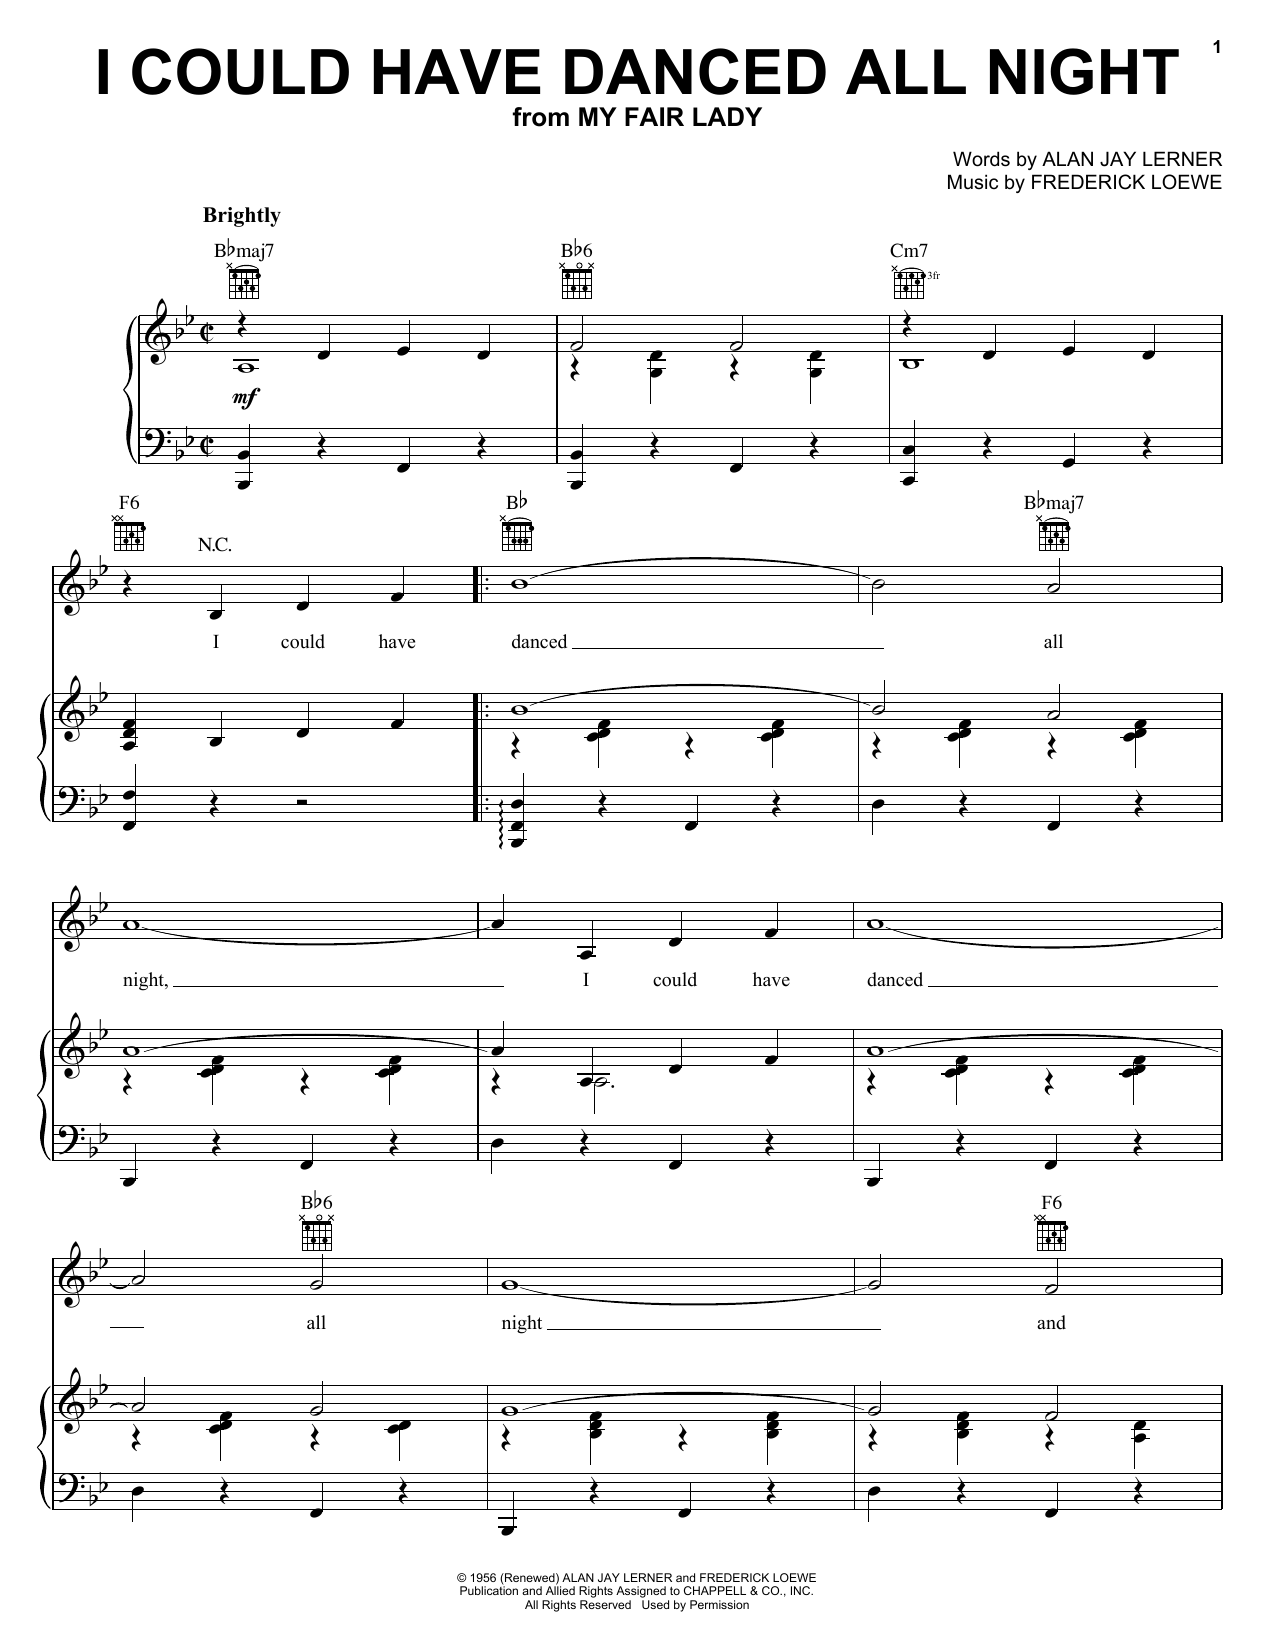 Download Lerner & Loewe I Could Have Danced All Night sheet music notes and chords for Piano, Vocal & Guitar (Right-Hand Melody) - Download Printable PDF and start playing in minutes.